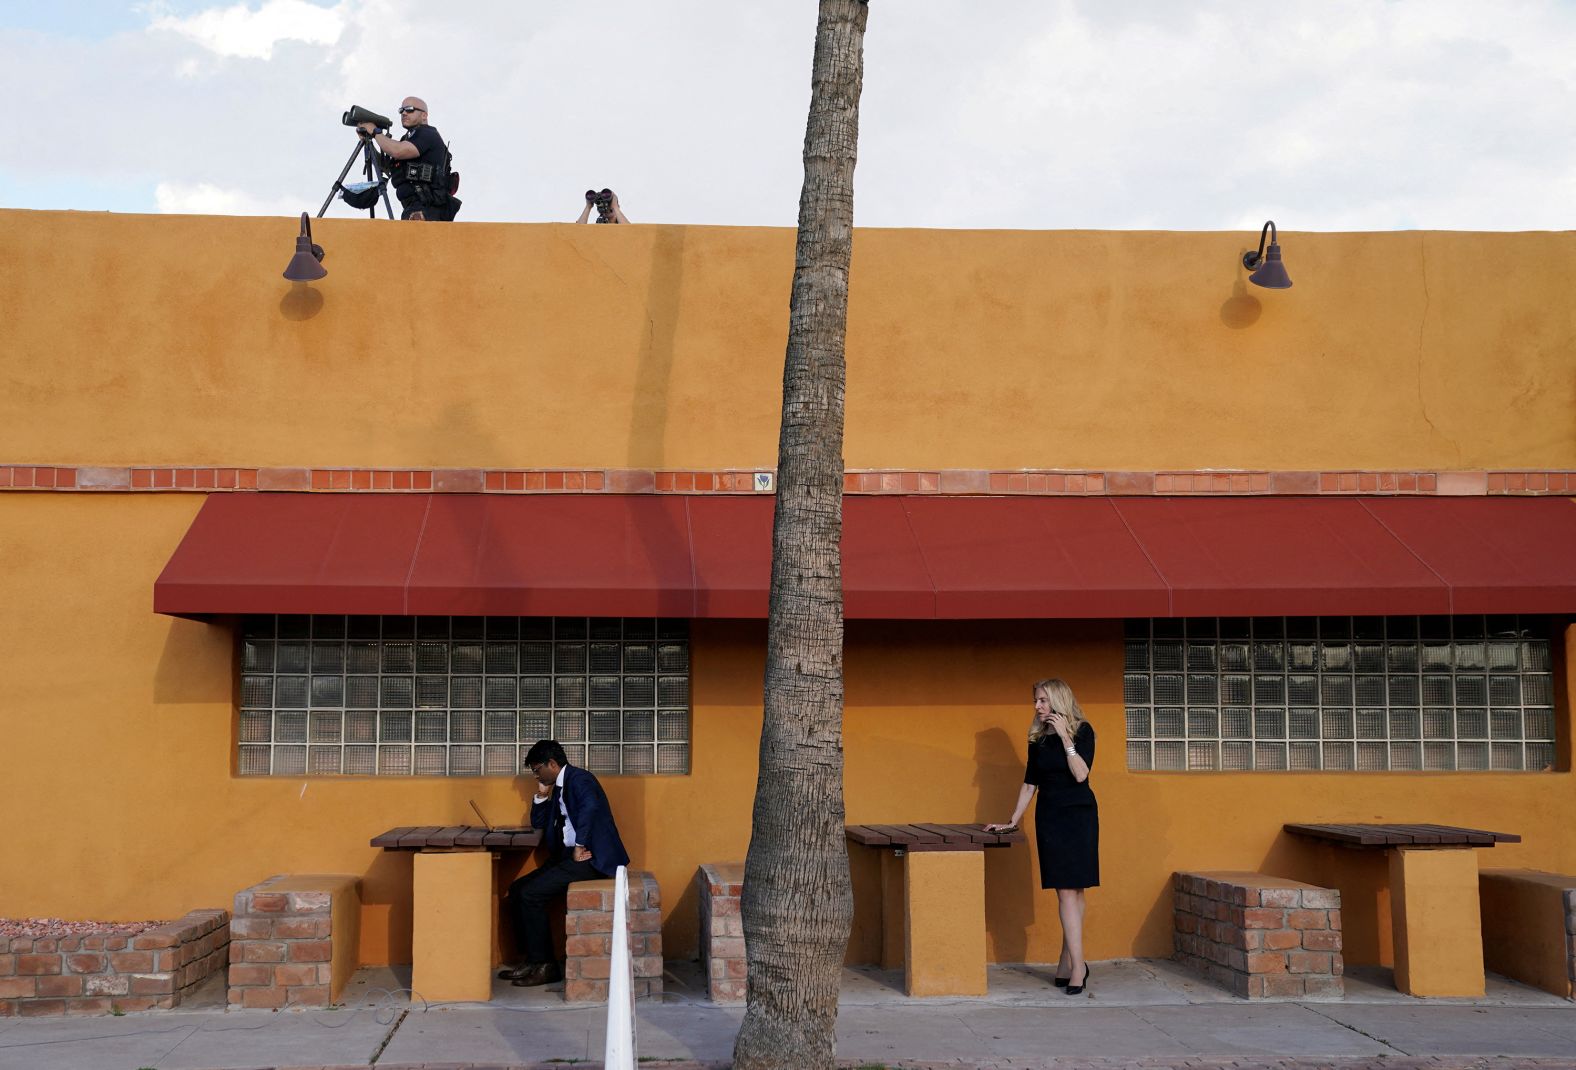 President Joe Biden's director of speech writing Vinay Reddy works at his laptop and White House economic advisor Lael Brainard talks on her phone as members of the Secret Service keep watch atop a Mexican restaurant where Biden was holding a campaign event in Phoenix on Tuesday, March 19. The president took his reelection pitch to <a href="https://www.cnn.com/2024/03/19/politics/joe-biden-western-swing/index.html" target="_blank">Western battleground states</a> this week.